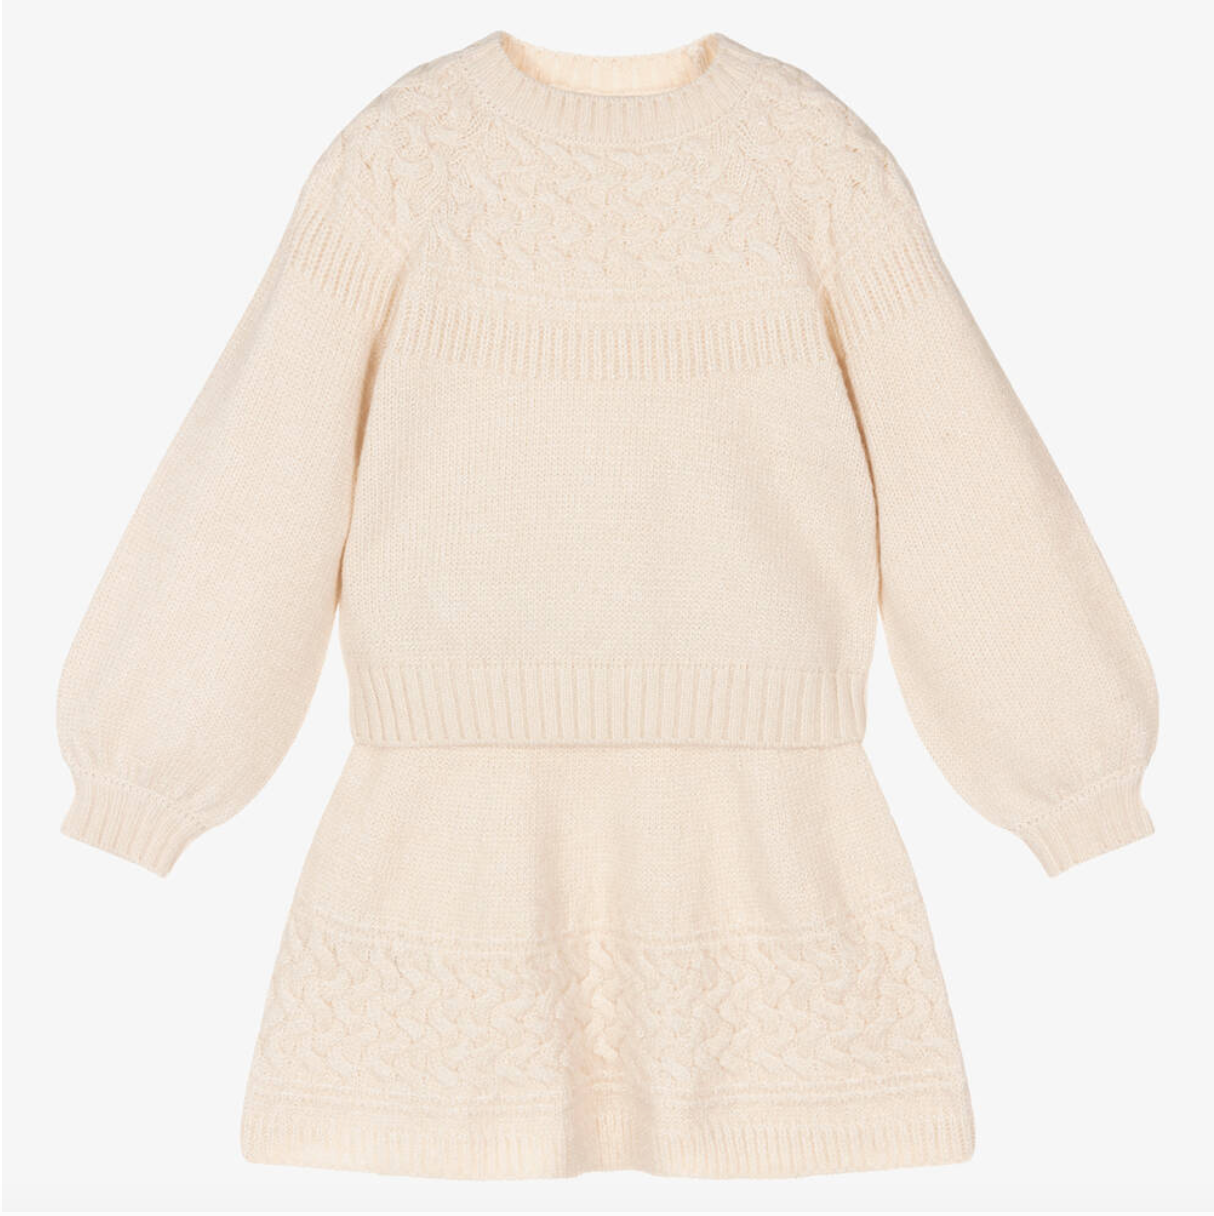 Ivory Shimmer Cable Knit 2pc Skirt Set